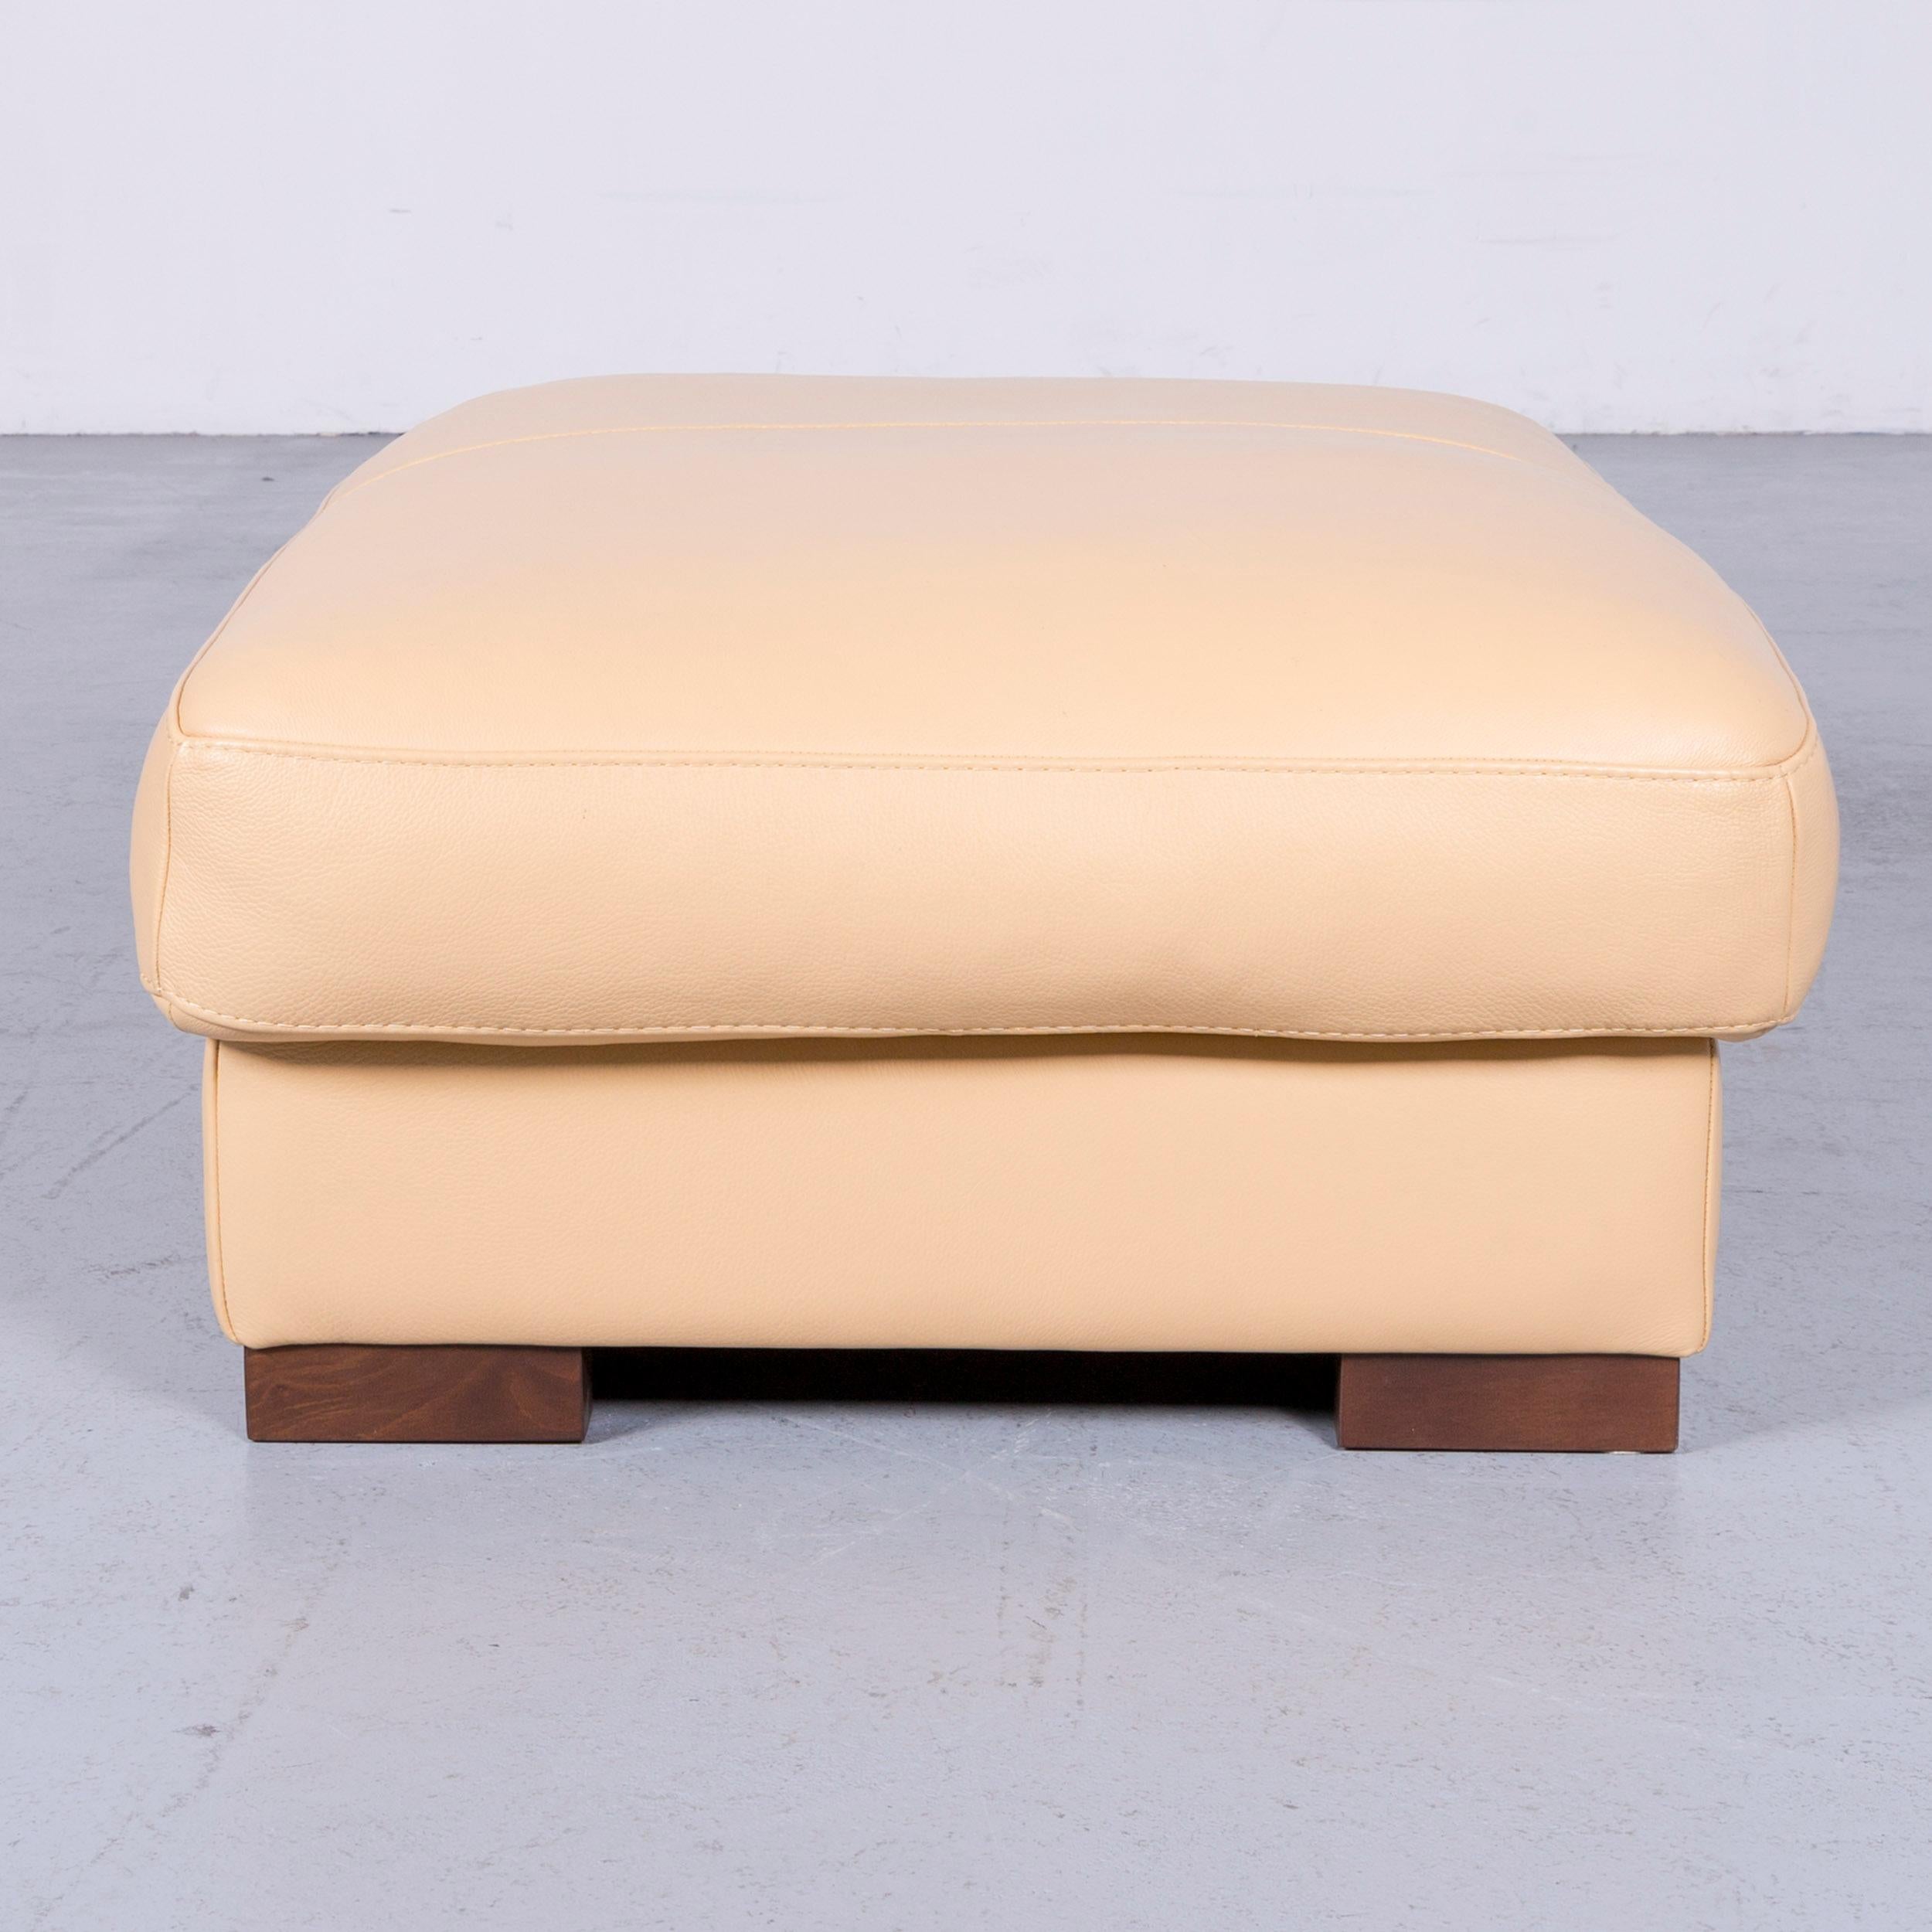 Beige colored designer footstool, in a minimalistic and vintage design, made for pure comfort.